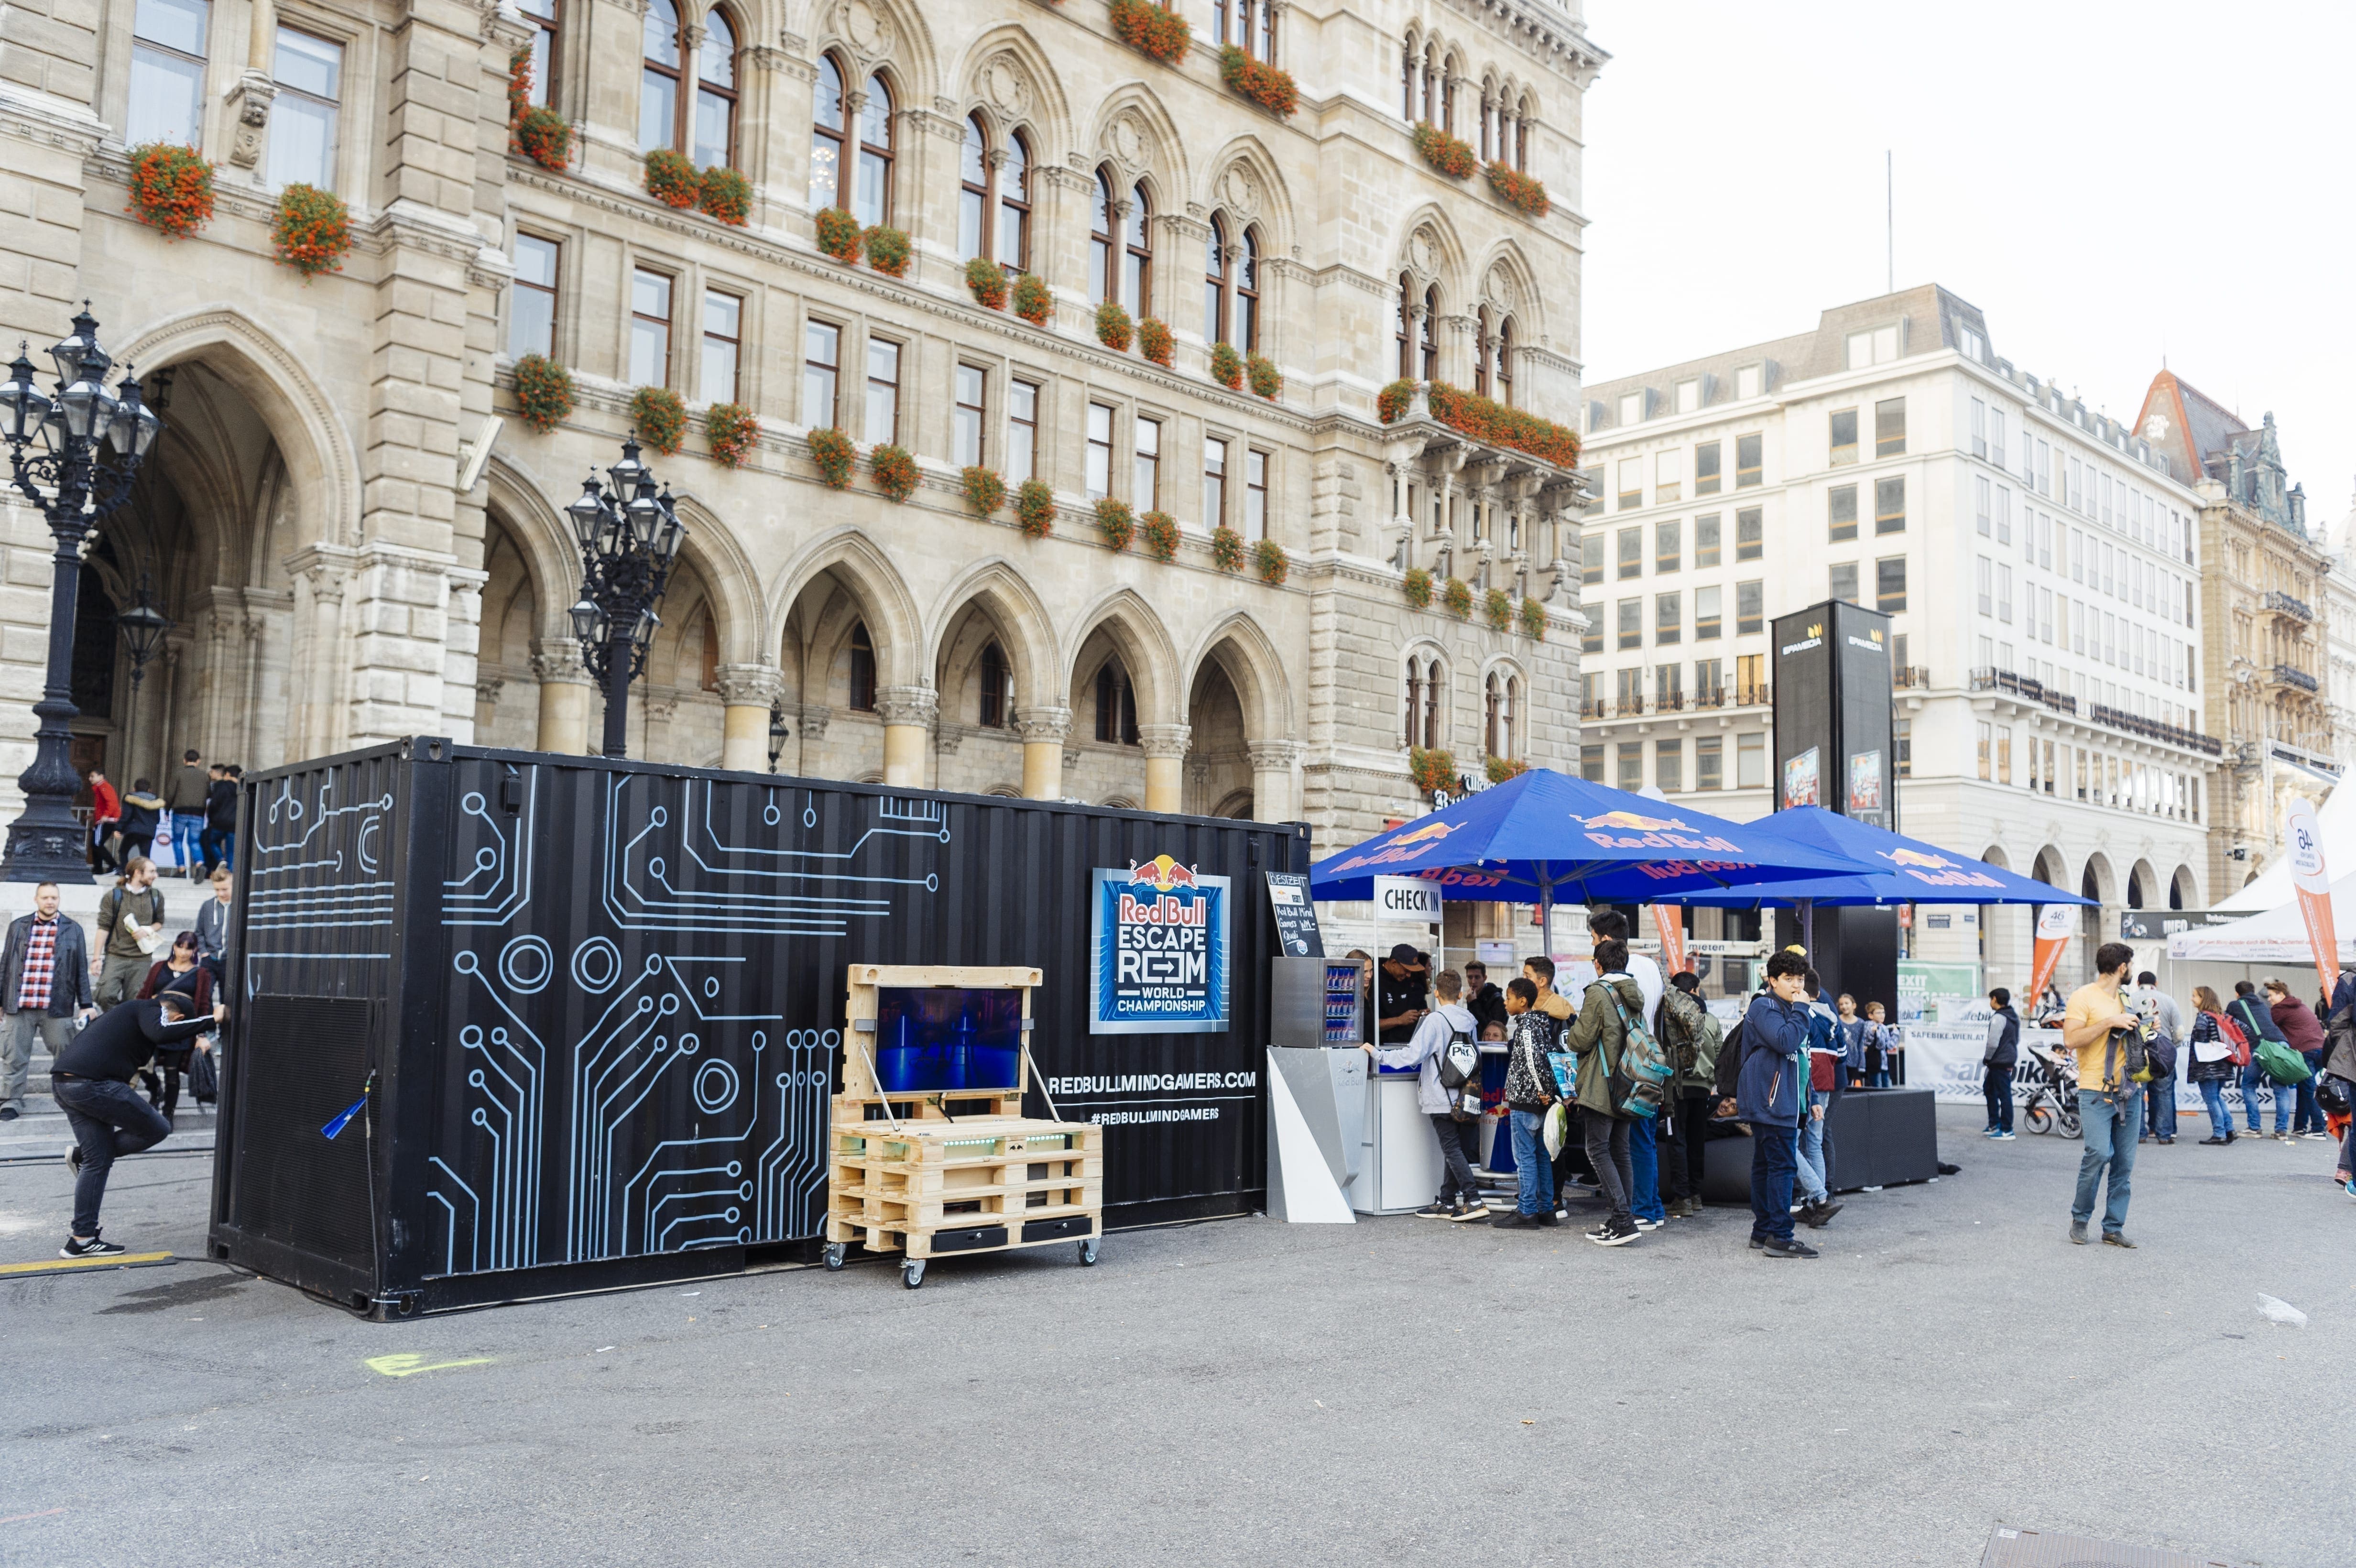 Venue of the Red Bull Escape Room World Championship Qualifier 2018 Vienna, Austria on October 19th, 2018